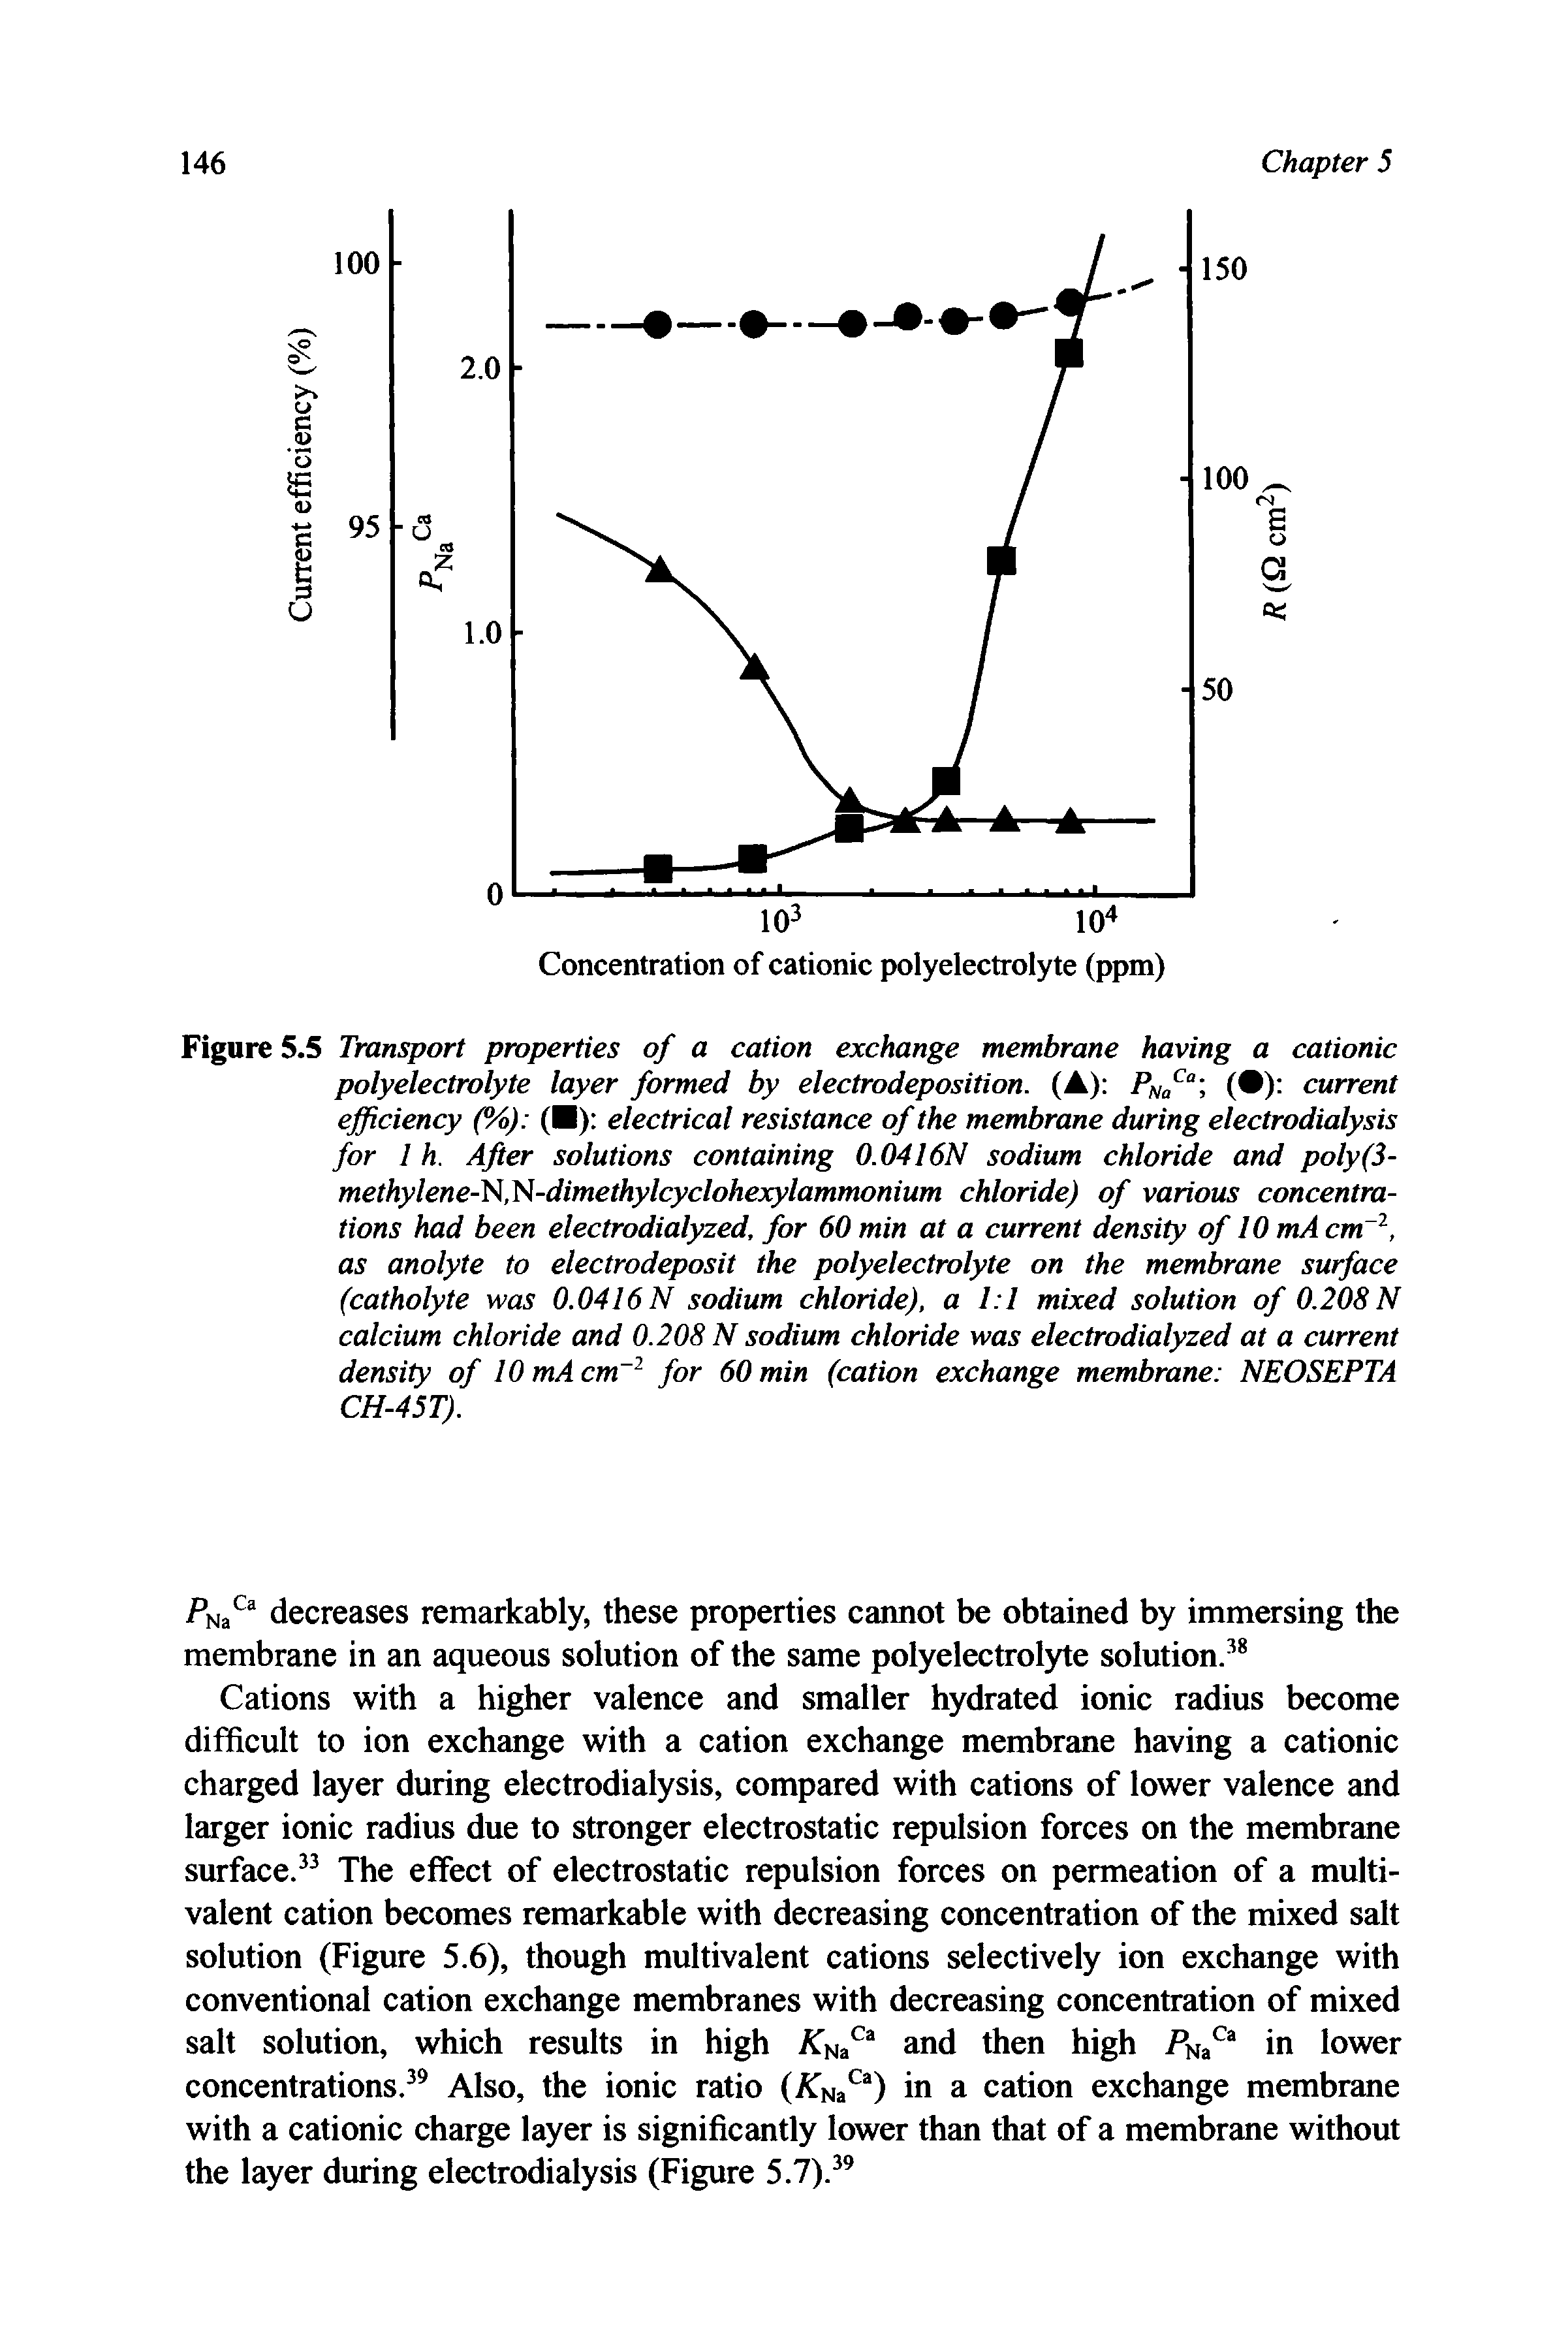 Figure 5.5 Transport properties of a cation exchange membrane having a cationic polyelectrolyte layer formed by electrodeposition. (A) PNaCa ( ) current efficiency (%) ( ) electrical resistance of the membrane during electrodialysis for 1 h. After solutions containing 0.0416N sodium chloride and poly(3-methylene-N, N-dimethylcyclohexylammonium chloride) of various concentrations had been electrodialyzed, for 60 min at a current density of 10 mA cm 2, as anolyte to electrodeposit the polyelectrolyte on the membrane surface (catholyte was 0.0416N sodium chloride), a 1 1 mixed solution of 0.208N calcium chloride and 0.208 N sodium chloride was electrodialyzed at a current density of 10 mA cmr1 for 60 min (cation exchange membrane NEOSEPTA CH-45T).